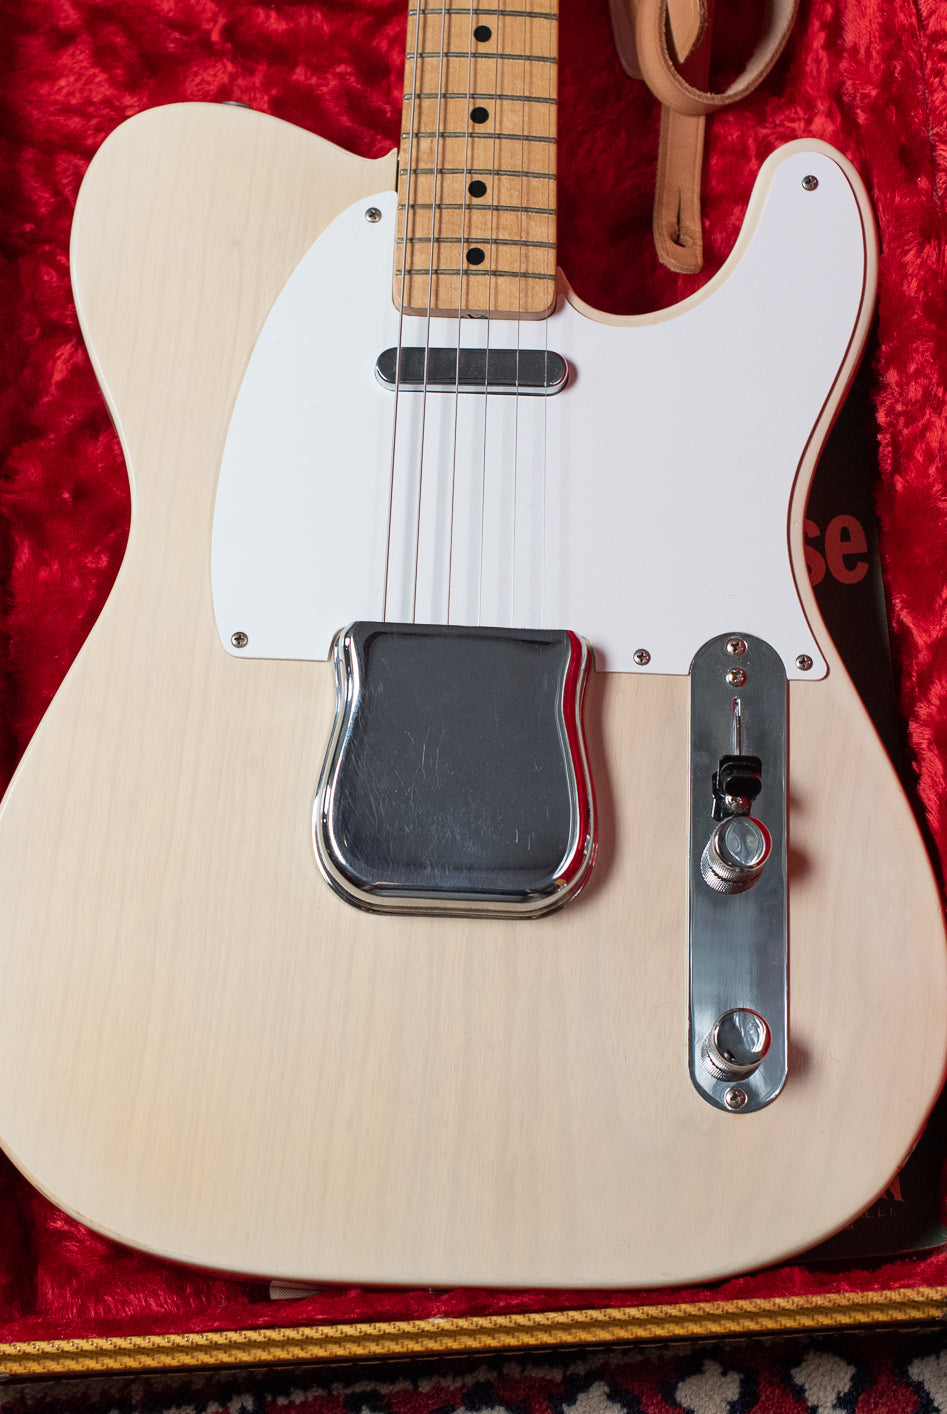 Fender Telecaster 1957 vintage original guitar. How to date a Fender Telecaster and what is my Fender Telecaster worth. 